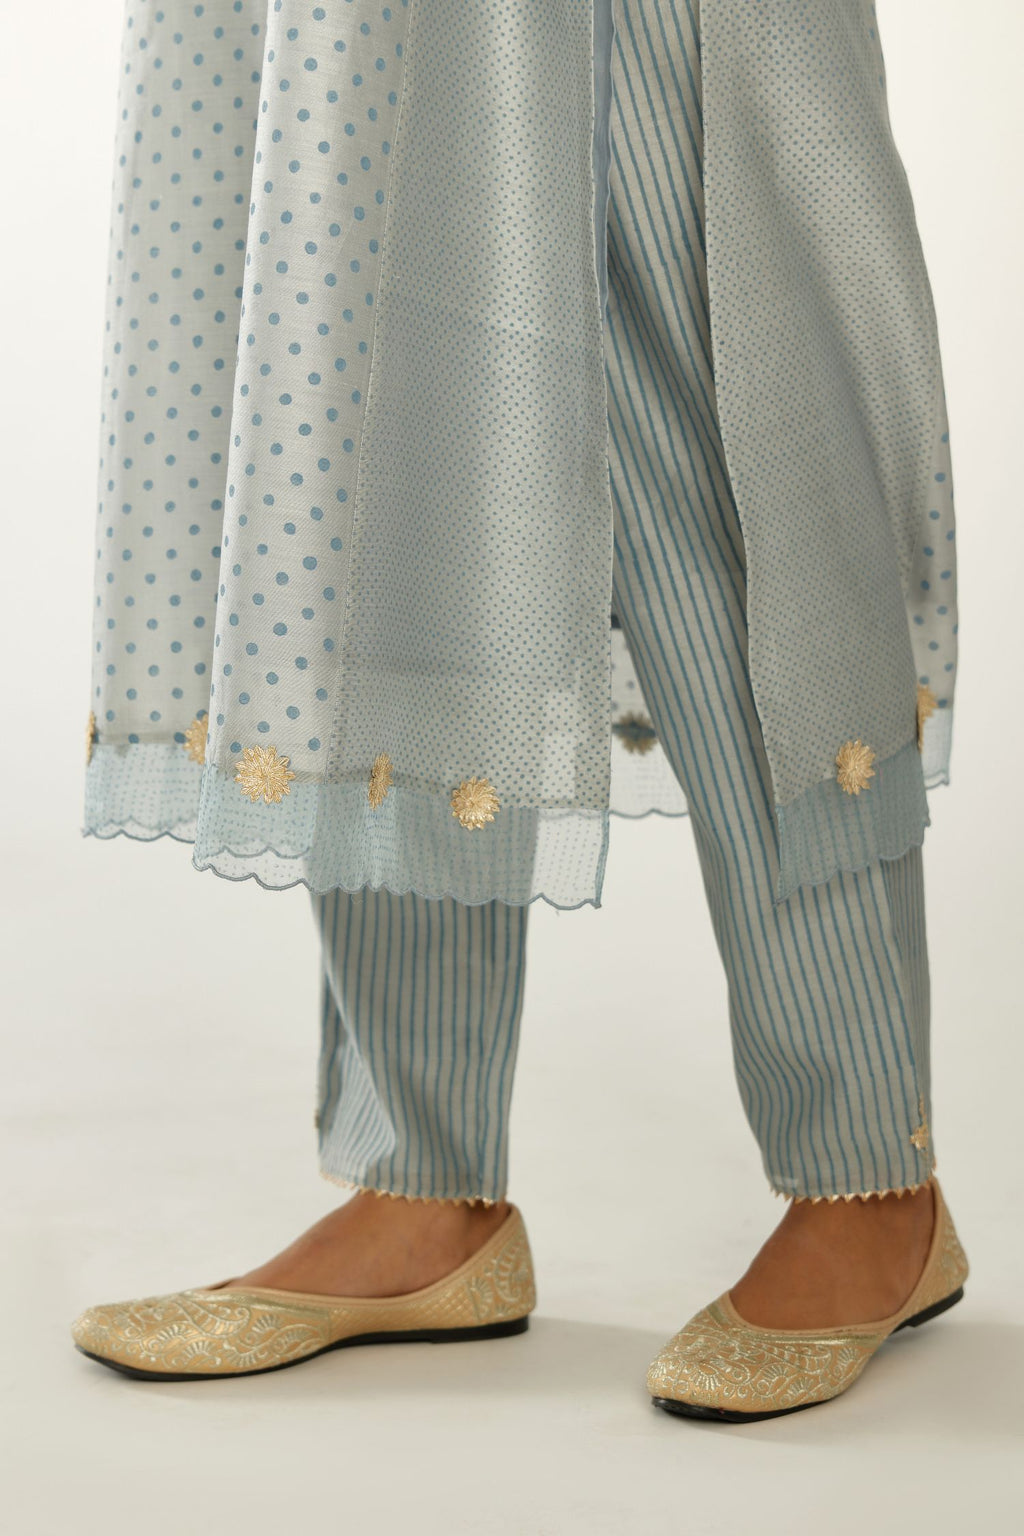 Blue hand block printed silk chanderi kurta set with concealed button placket neckline, Highlighted with gota flower and scalloped organza at edges.